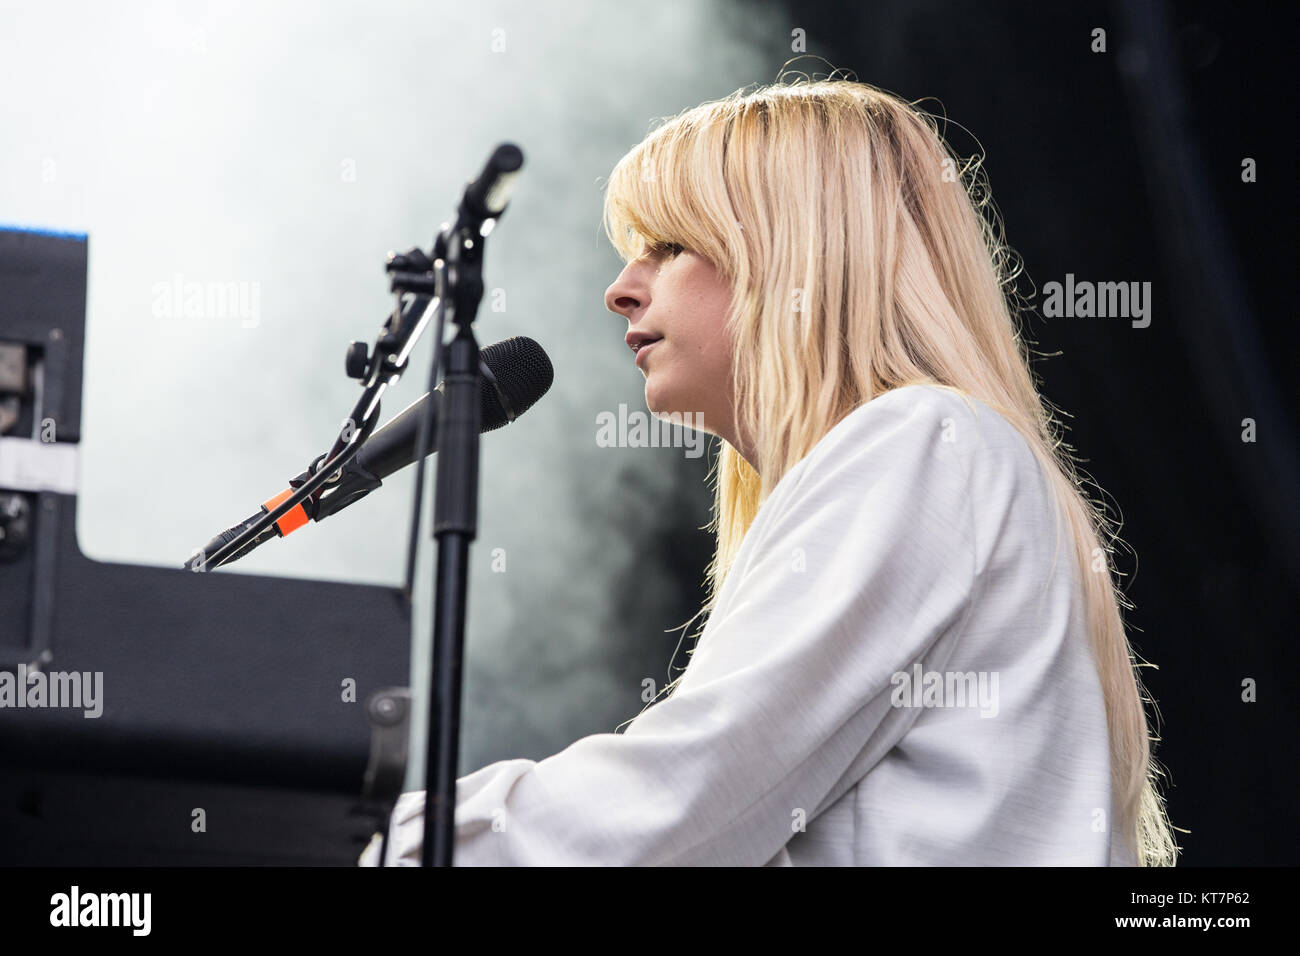 The Norwegian singer-songwriter and musician Susanne Sundfør performs a live concert at the Norwegian music Norwegian wood in Oslo. Norway, 15/06 2017. Stock Photo